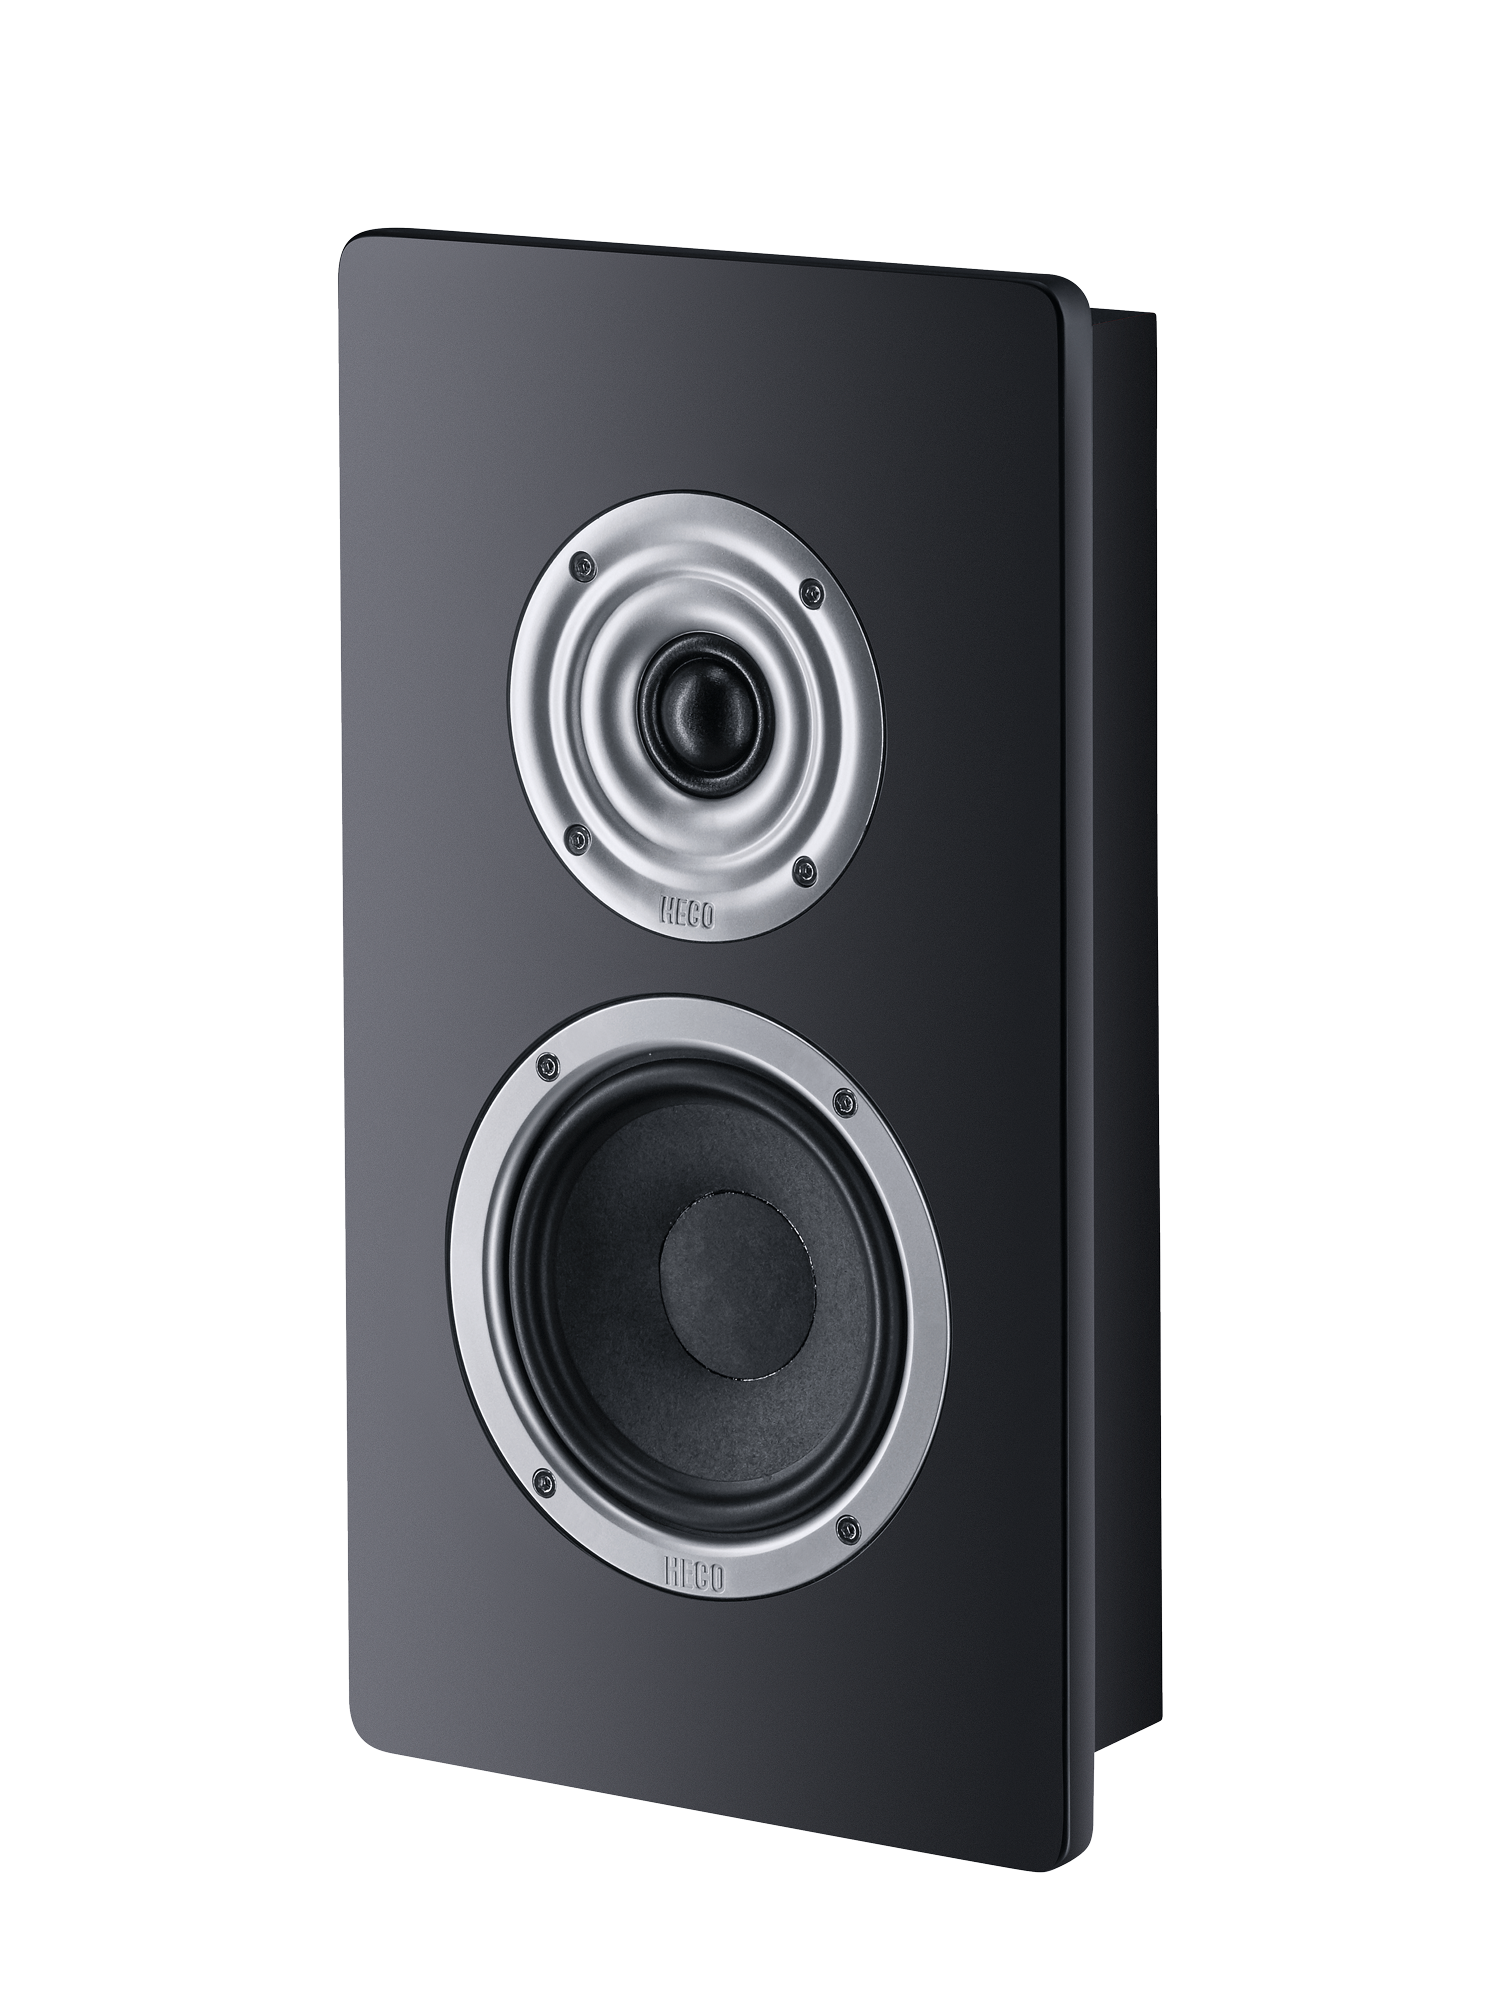 Ambient Line 11 F, wall-mounted speaker, universal on-wall speaker system expandable to large home theater system